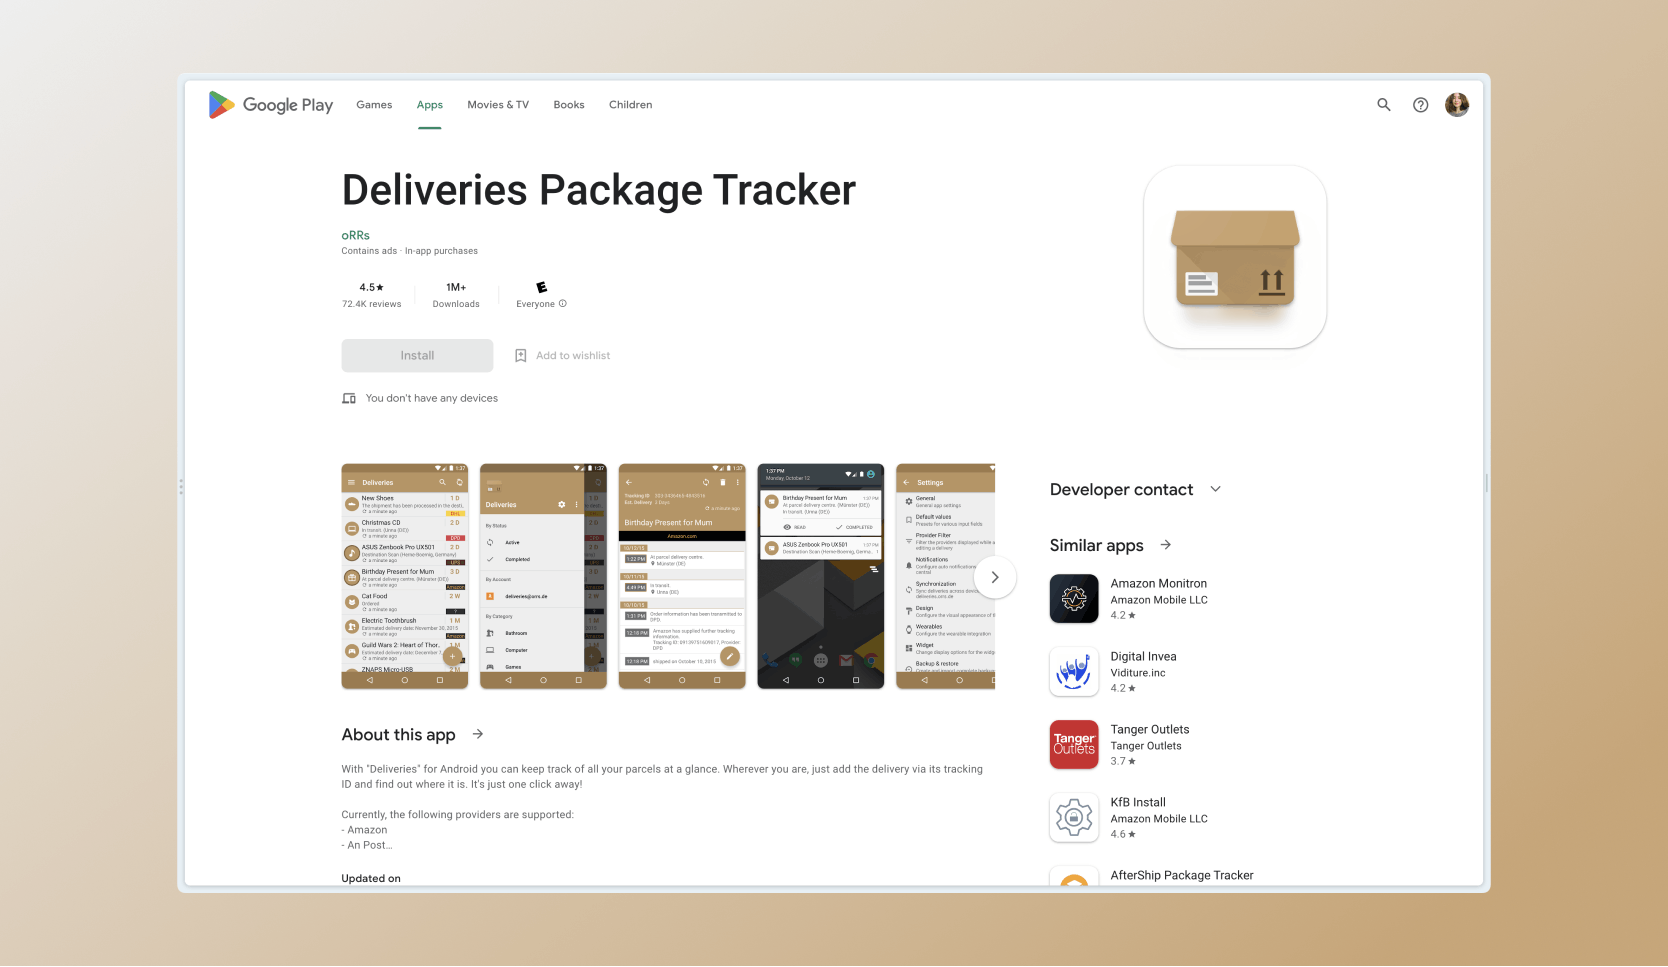 Google Playstore page for the Deliveries Package Tracker app